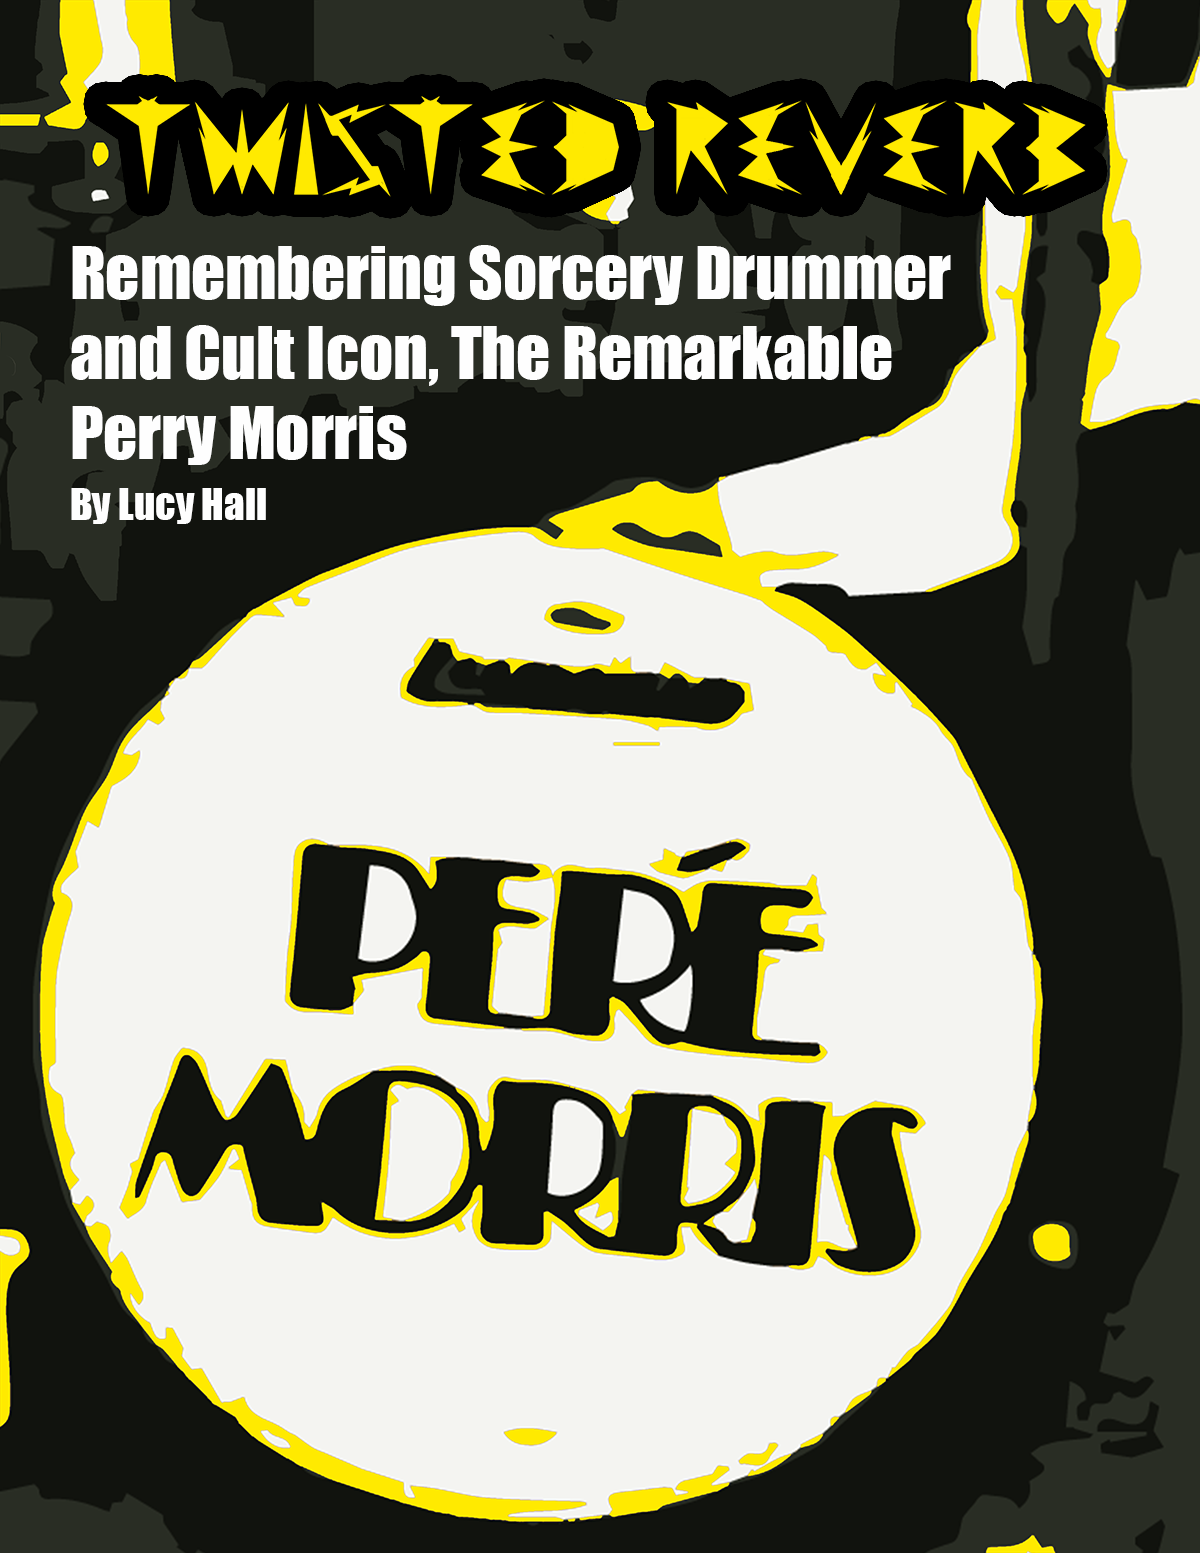 Remembering Sorcery Drummer and Cult Icon, The Remarkable Perry Morris